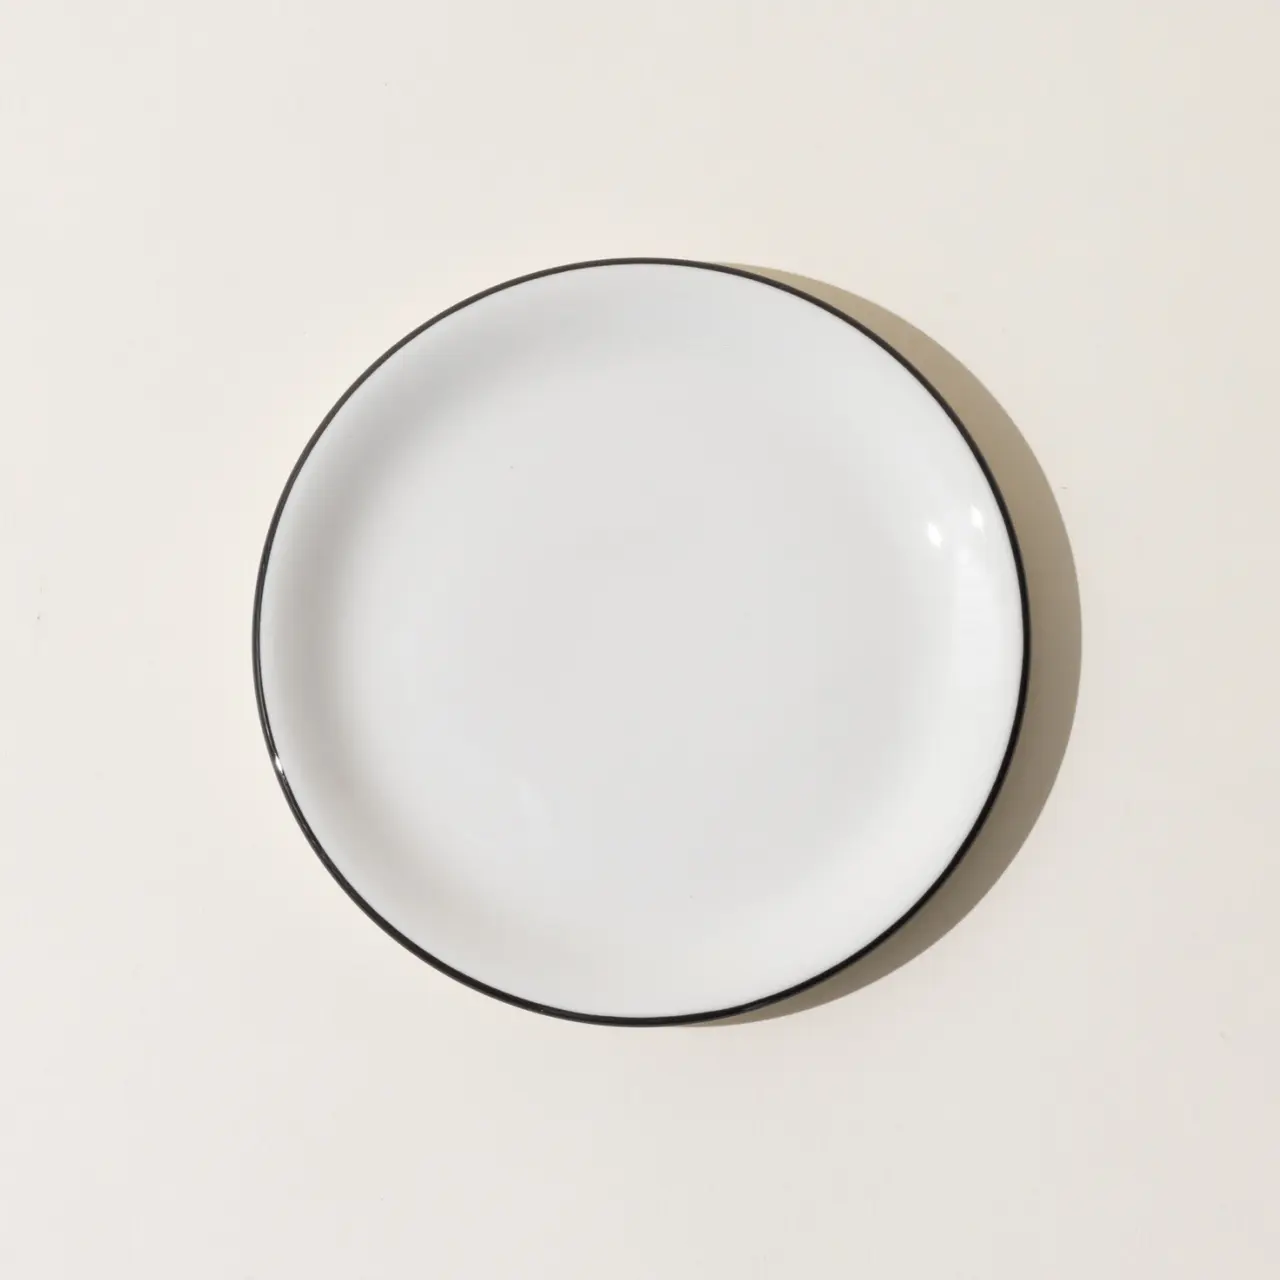 bread and butter plate black rim top